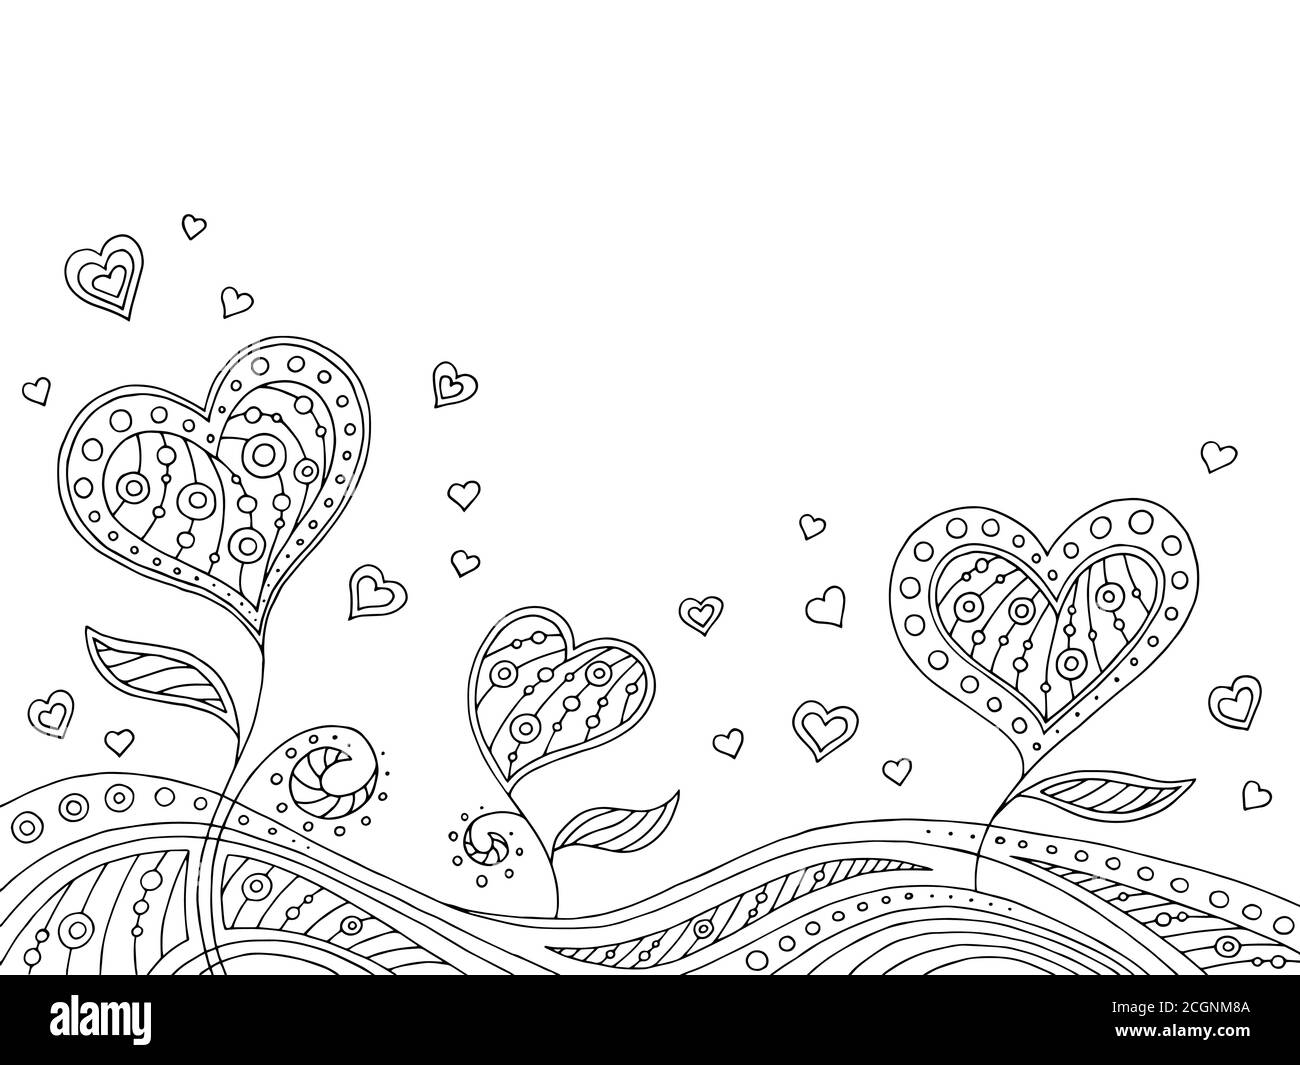 Pattern doodle black white heart graphic background illustration vector Stock Vector